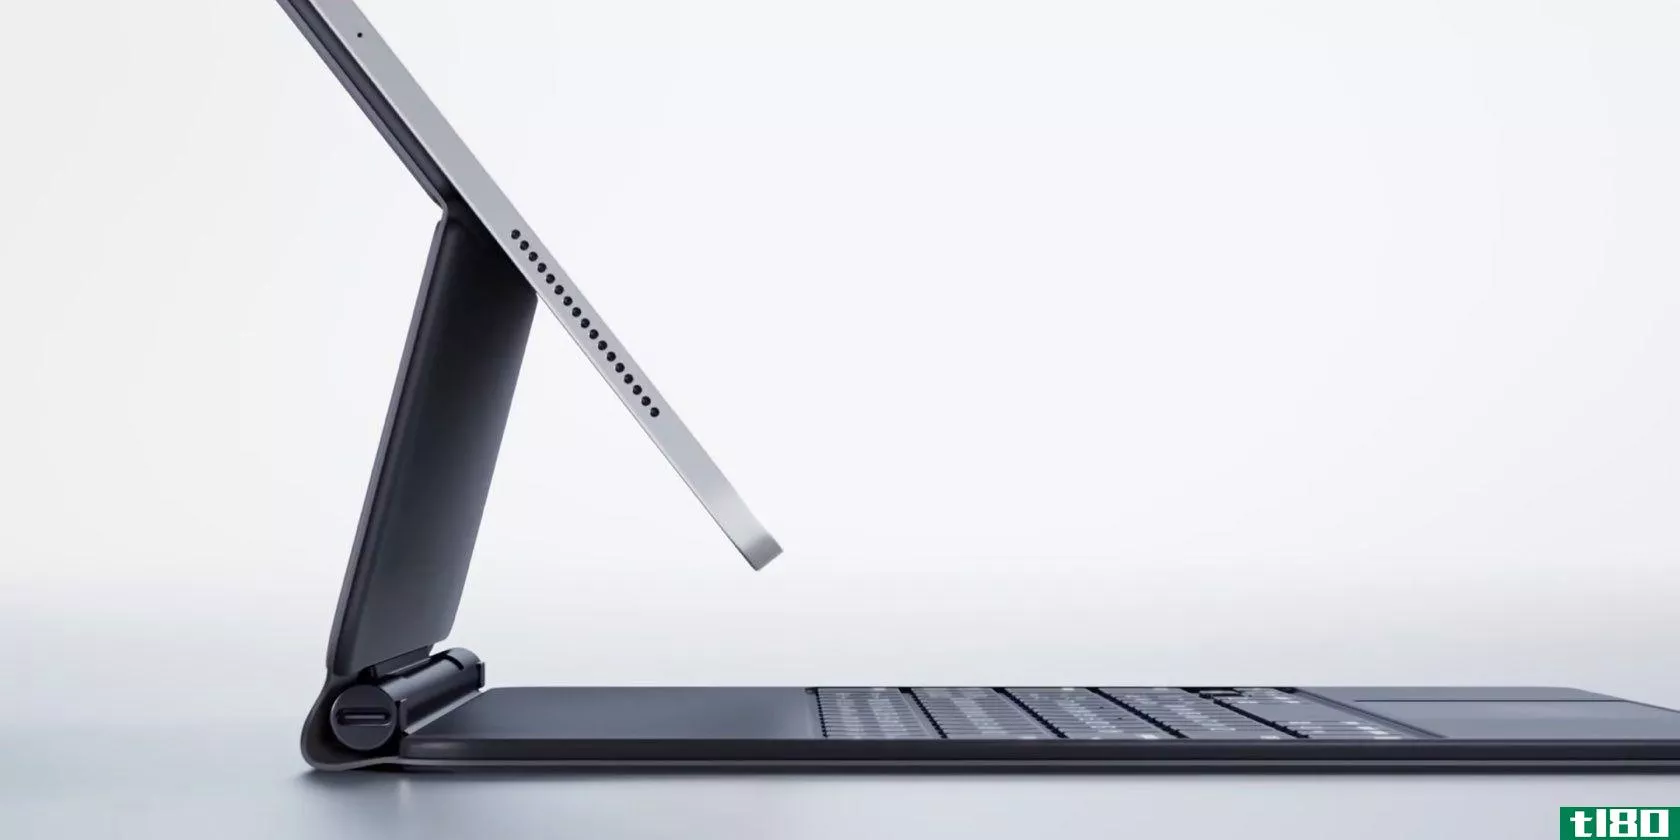 A profile view of a 12.9-inch iPad Pro (2018 model) suspended mid-air on a Magic Keyboard